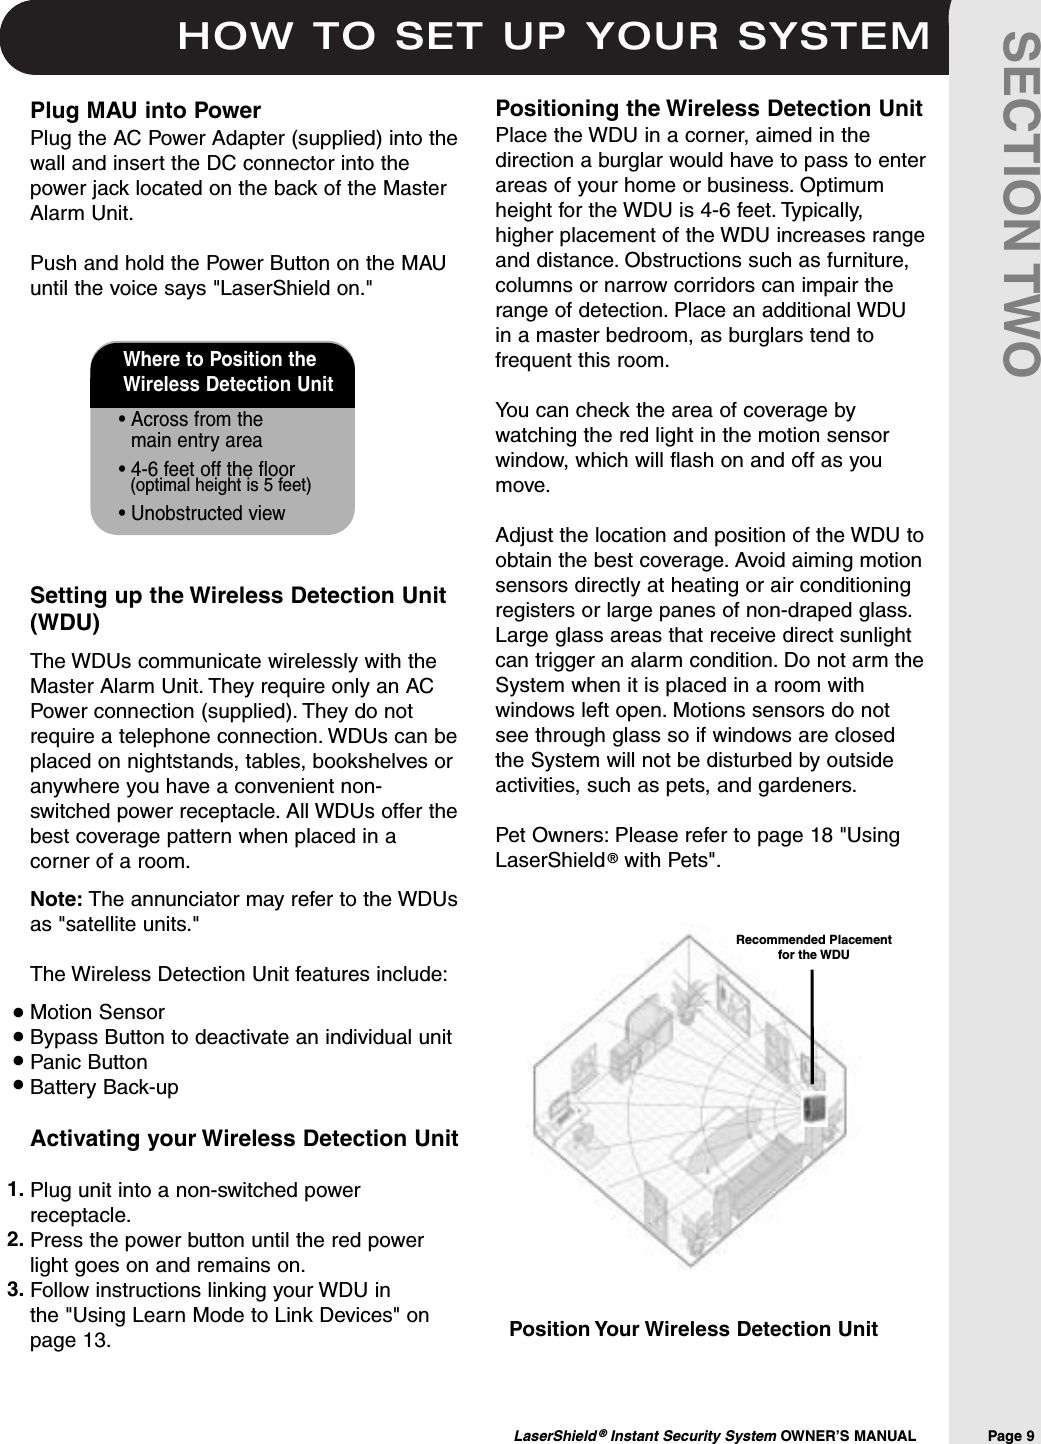 HOW TO SET UP YOUR SYSTEMLaserShield ®Instant Security System OWNER’S MANUAL                Page 9SECTION TWOWhere to Position the Wireless Detection Unit• Across from the main entry area• 4-6 feet off the floor(optimal height is 5 feet)• Unobstructed viewPosition Your Wireless Detection UnitPositioning the Wireless Detection UnitPlace the WDU in a corner, aimed in thedirection a burglar would have to pass to enterareas of your home or business. Optimumheight for the WDU is 4-6 feet. Typically,higher placement of the WDU increases rangeand distance. Obstructions such as furniture,columns or narrow corridors can impair therange of detection. Place an additional WDUin a master bedroom, as burglars tend tofrequent this room.You can check the area of coverage bywatching the red light in the motion sensorwindow, which will flash on and off as youmove.Adjust the location and position of the WDU toobtain the best coverage. Avoid aiming motionsensors directly at heating or air conditioningregisters or large panes of non-draped glass.Large glass areas that receive direct sunlightcan trigger an alarm condition. Do not arm theSystem when it is placed in a room withwindows left open. Motions sensors do notsee through glass so if windows are closedthe System will not be disturbed by outsideactivities, such as pets, and gardeners.Pet Owners: Please refer to page 18 &quot;UsingLaserShield ®with Pets&quot;.Plug MAU into PowerPlug the AC Power Adapter (supplied) into thewall and insert the DC connector into thepower jack located on the back of the MasterAlarm Unit.Push and hold the Power Button on the MAUuntil the voice says &quot;LaserShield on.&quot; Setting up the Wireless Detection Unit(WDU)The WDUs communicate wirelessly with theMaster Alarm Unit. They require only an ACPower connection (supplied). They do notrequire a telephone connection. WDUs can beplaced on nightstands, tables, bookshelves oranywhere you have a convenient non-switched power receptacle. All WDUs offer thebest coverage pattern when placed in acorner of a room.Note: The annunciator may refer to the WDUsas &quot;satellite units.&quot;The Wireless Detection Unit features include:Motion SensorBypass Button to deactivate an individual unitPanic ButtonBattery Back-upActivating your Wireless Detection UnitPlug unit into a non-switched powerreceptacle.Press the power button until the red powerlight goes on and remains on.Follow instructions linking your WDU in the &quot;Using Learn Mode to Link Devices&quot; onpage 13.••••1.2.3.Recommended Placement for the WDU